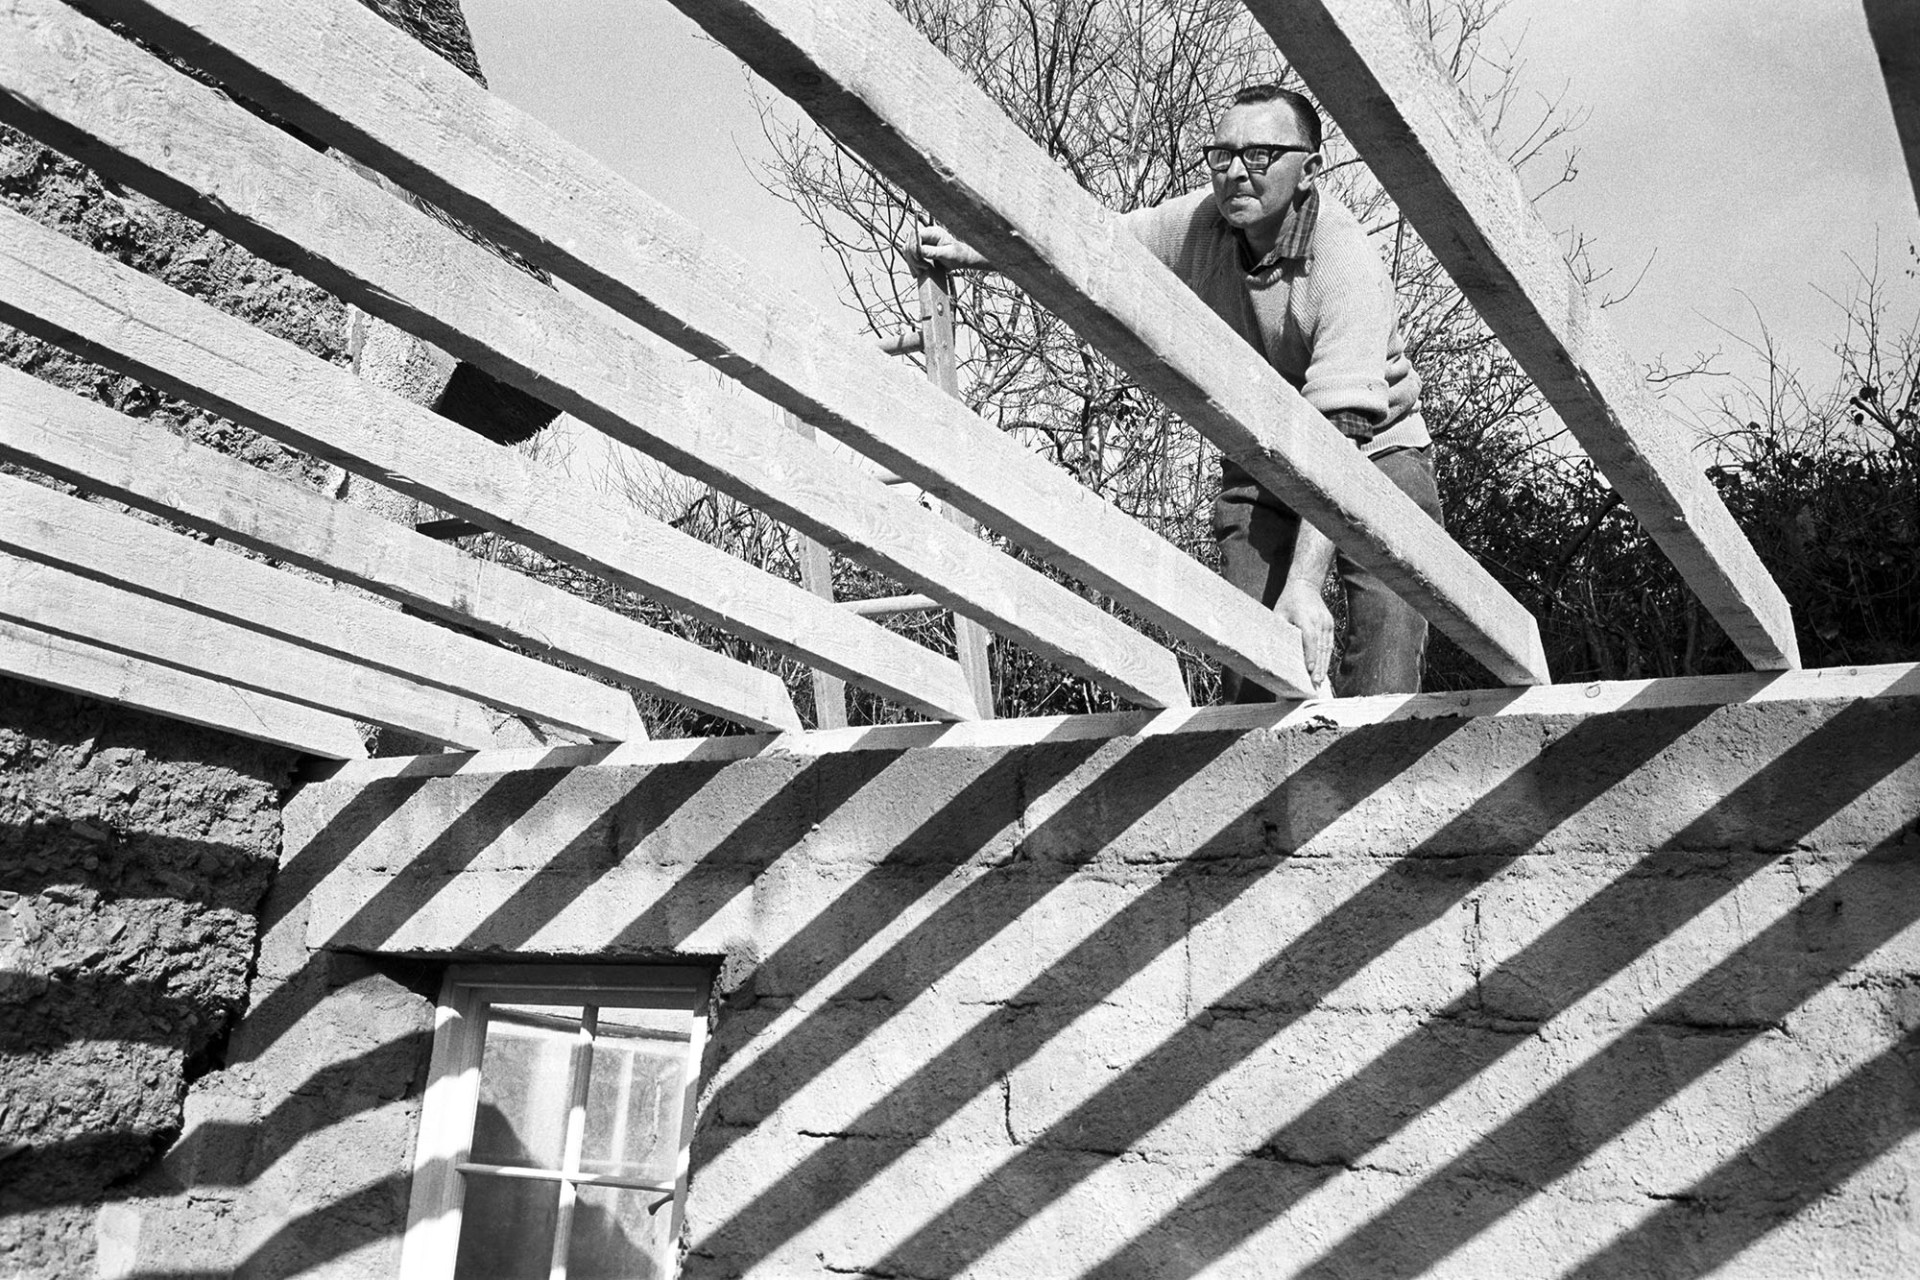 Man fixing beams in new extension to cottage.
[Clifford Palmer fixing roof timbers on an extension to the Ravilious' thatched cottage at Addisford, Dolton. See the 'Additional notes by James Ravilious' field for more information.]